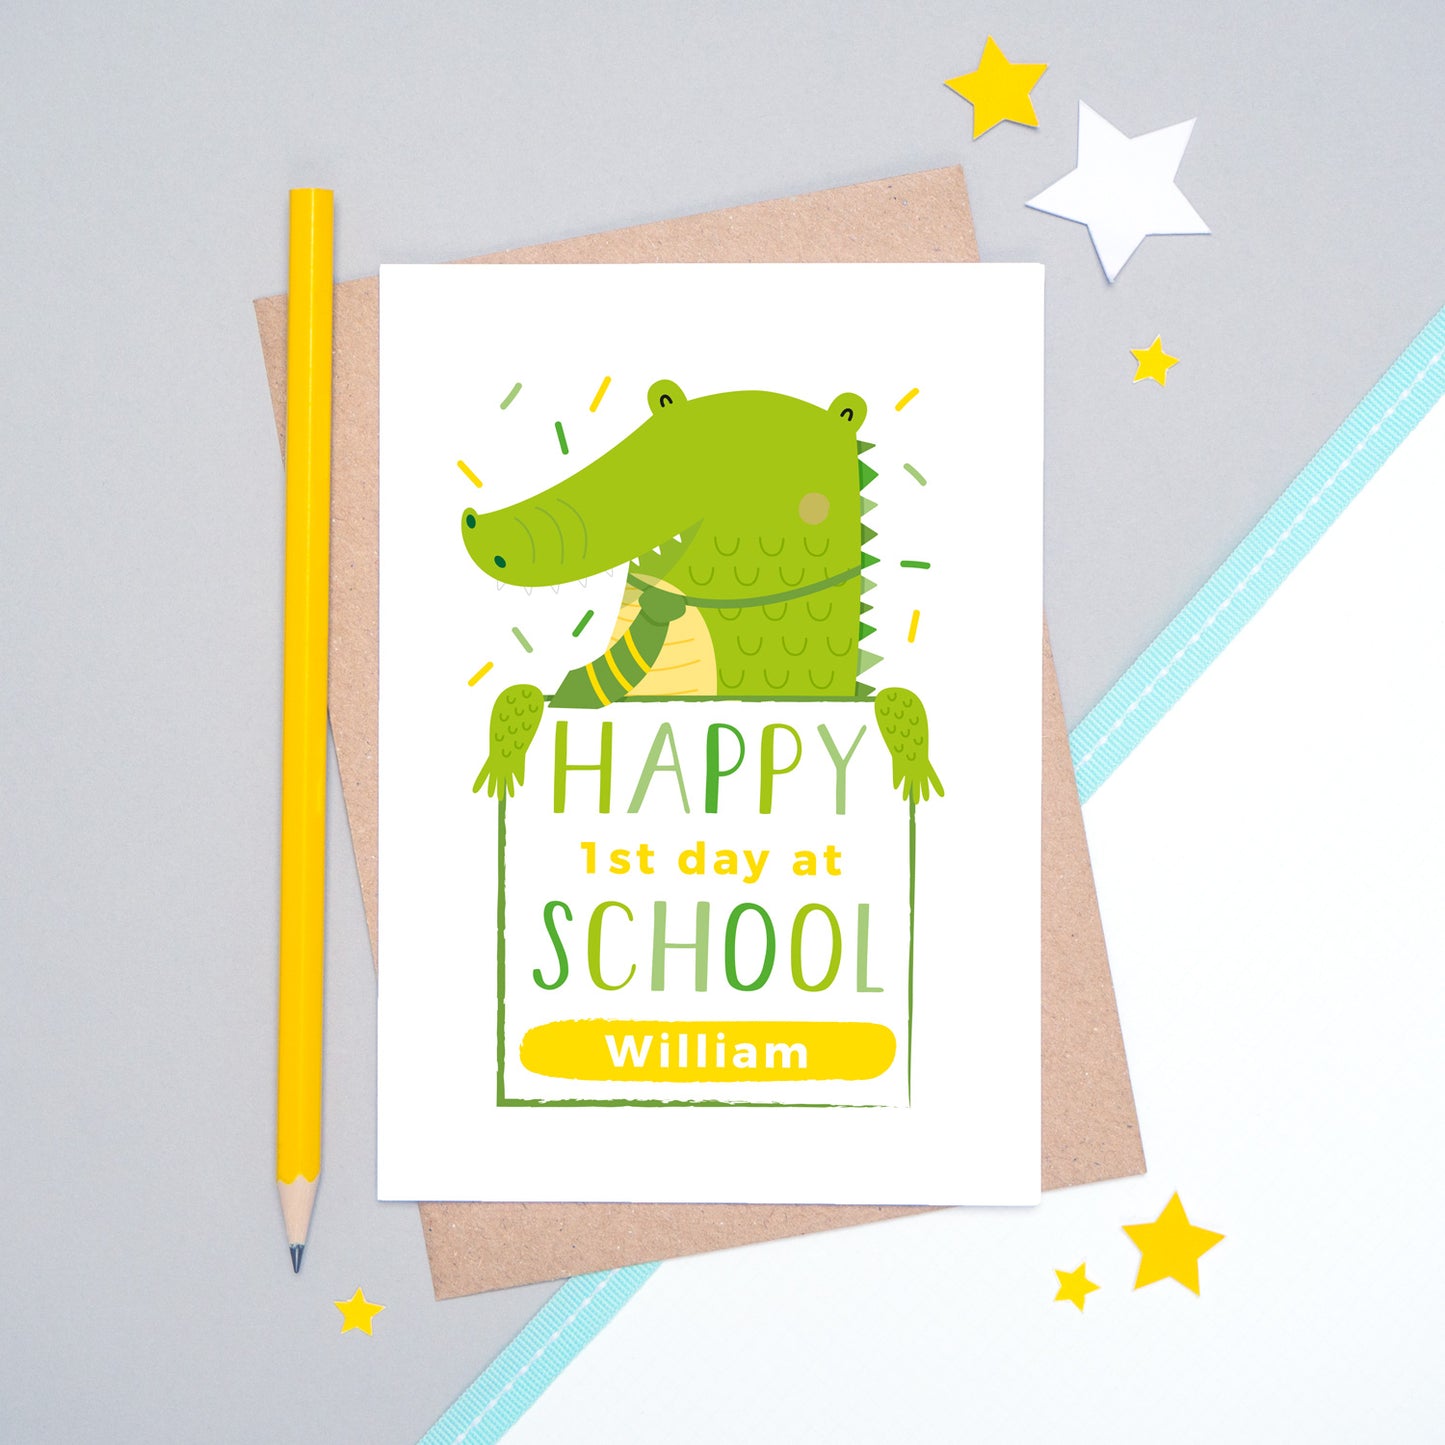 A happy 1st day at school personalised card featuring a friendly green crocodile sat on a grey and white background.